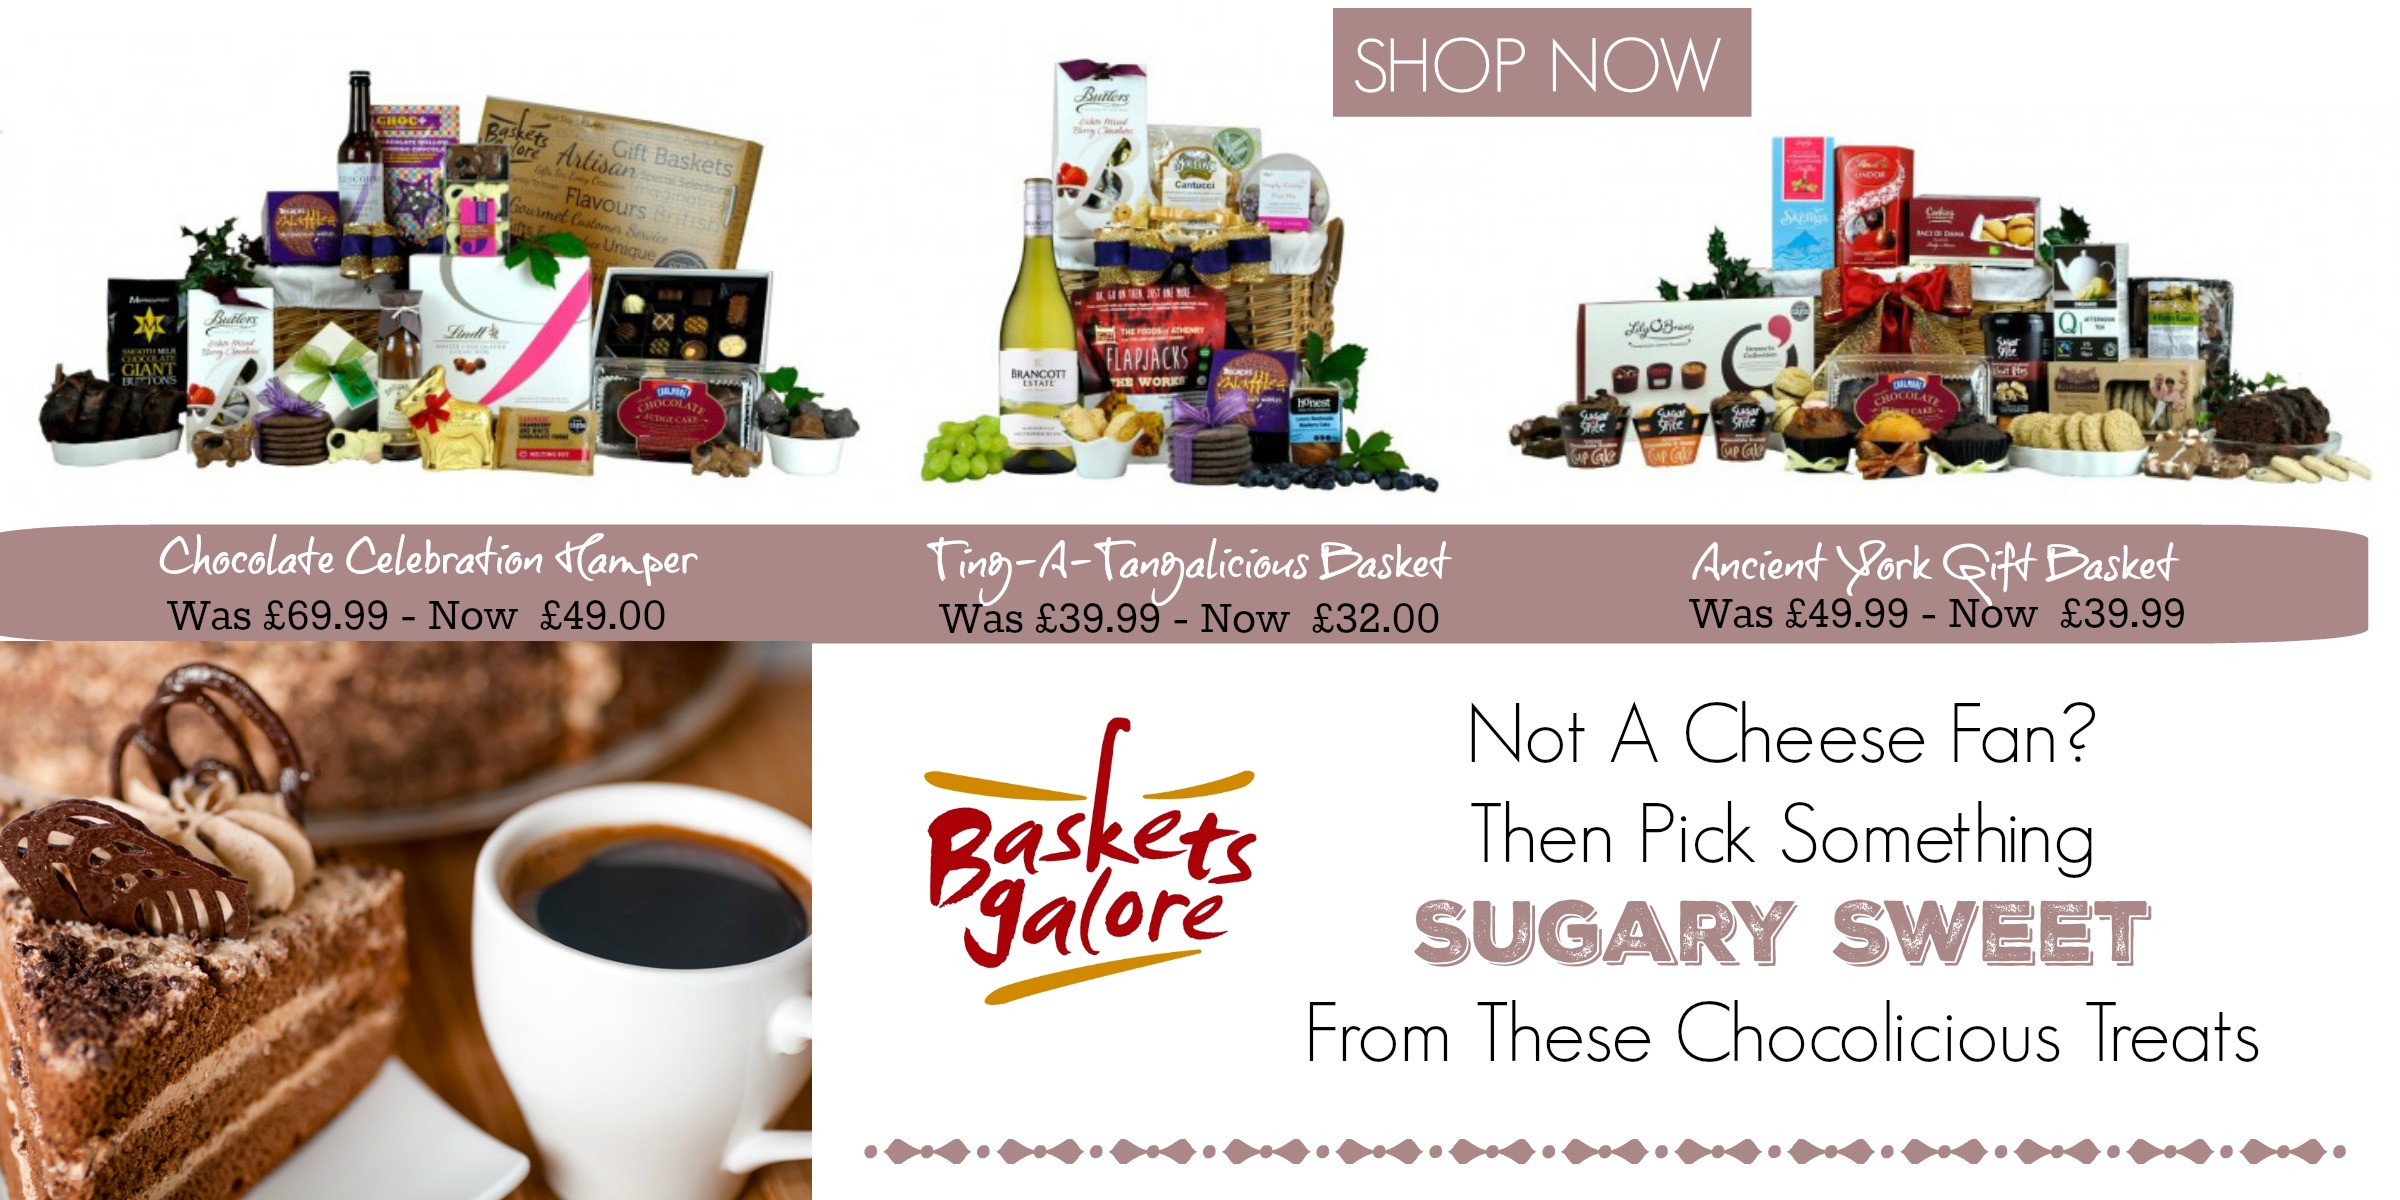 Chocolate Sale Email